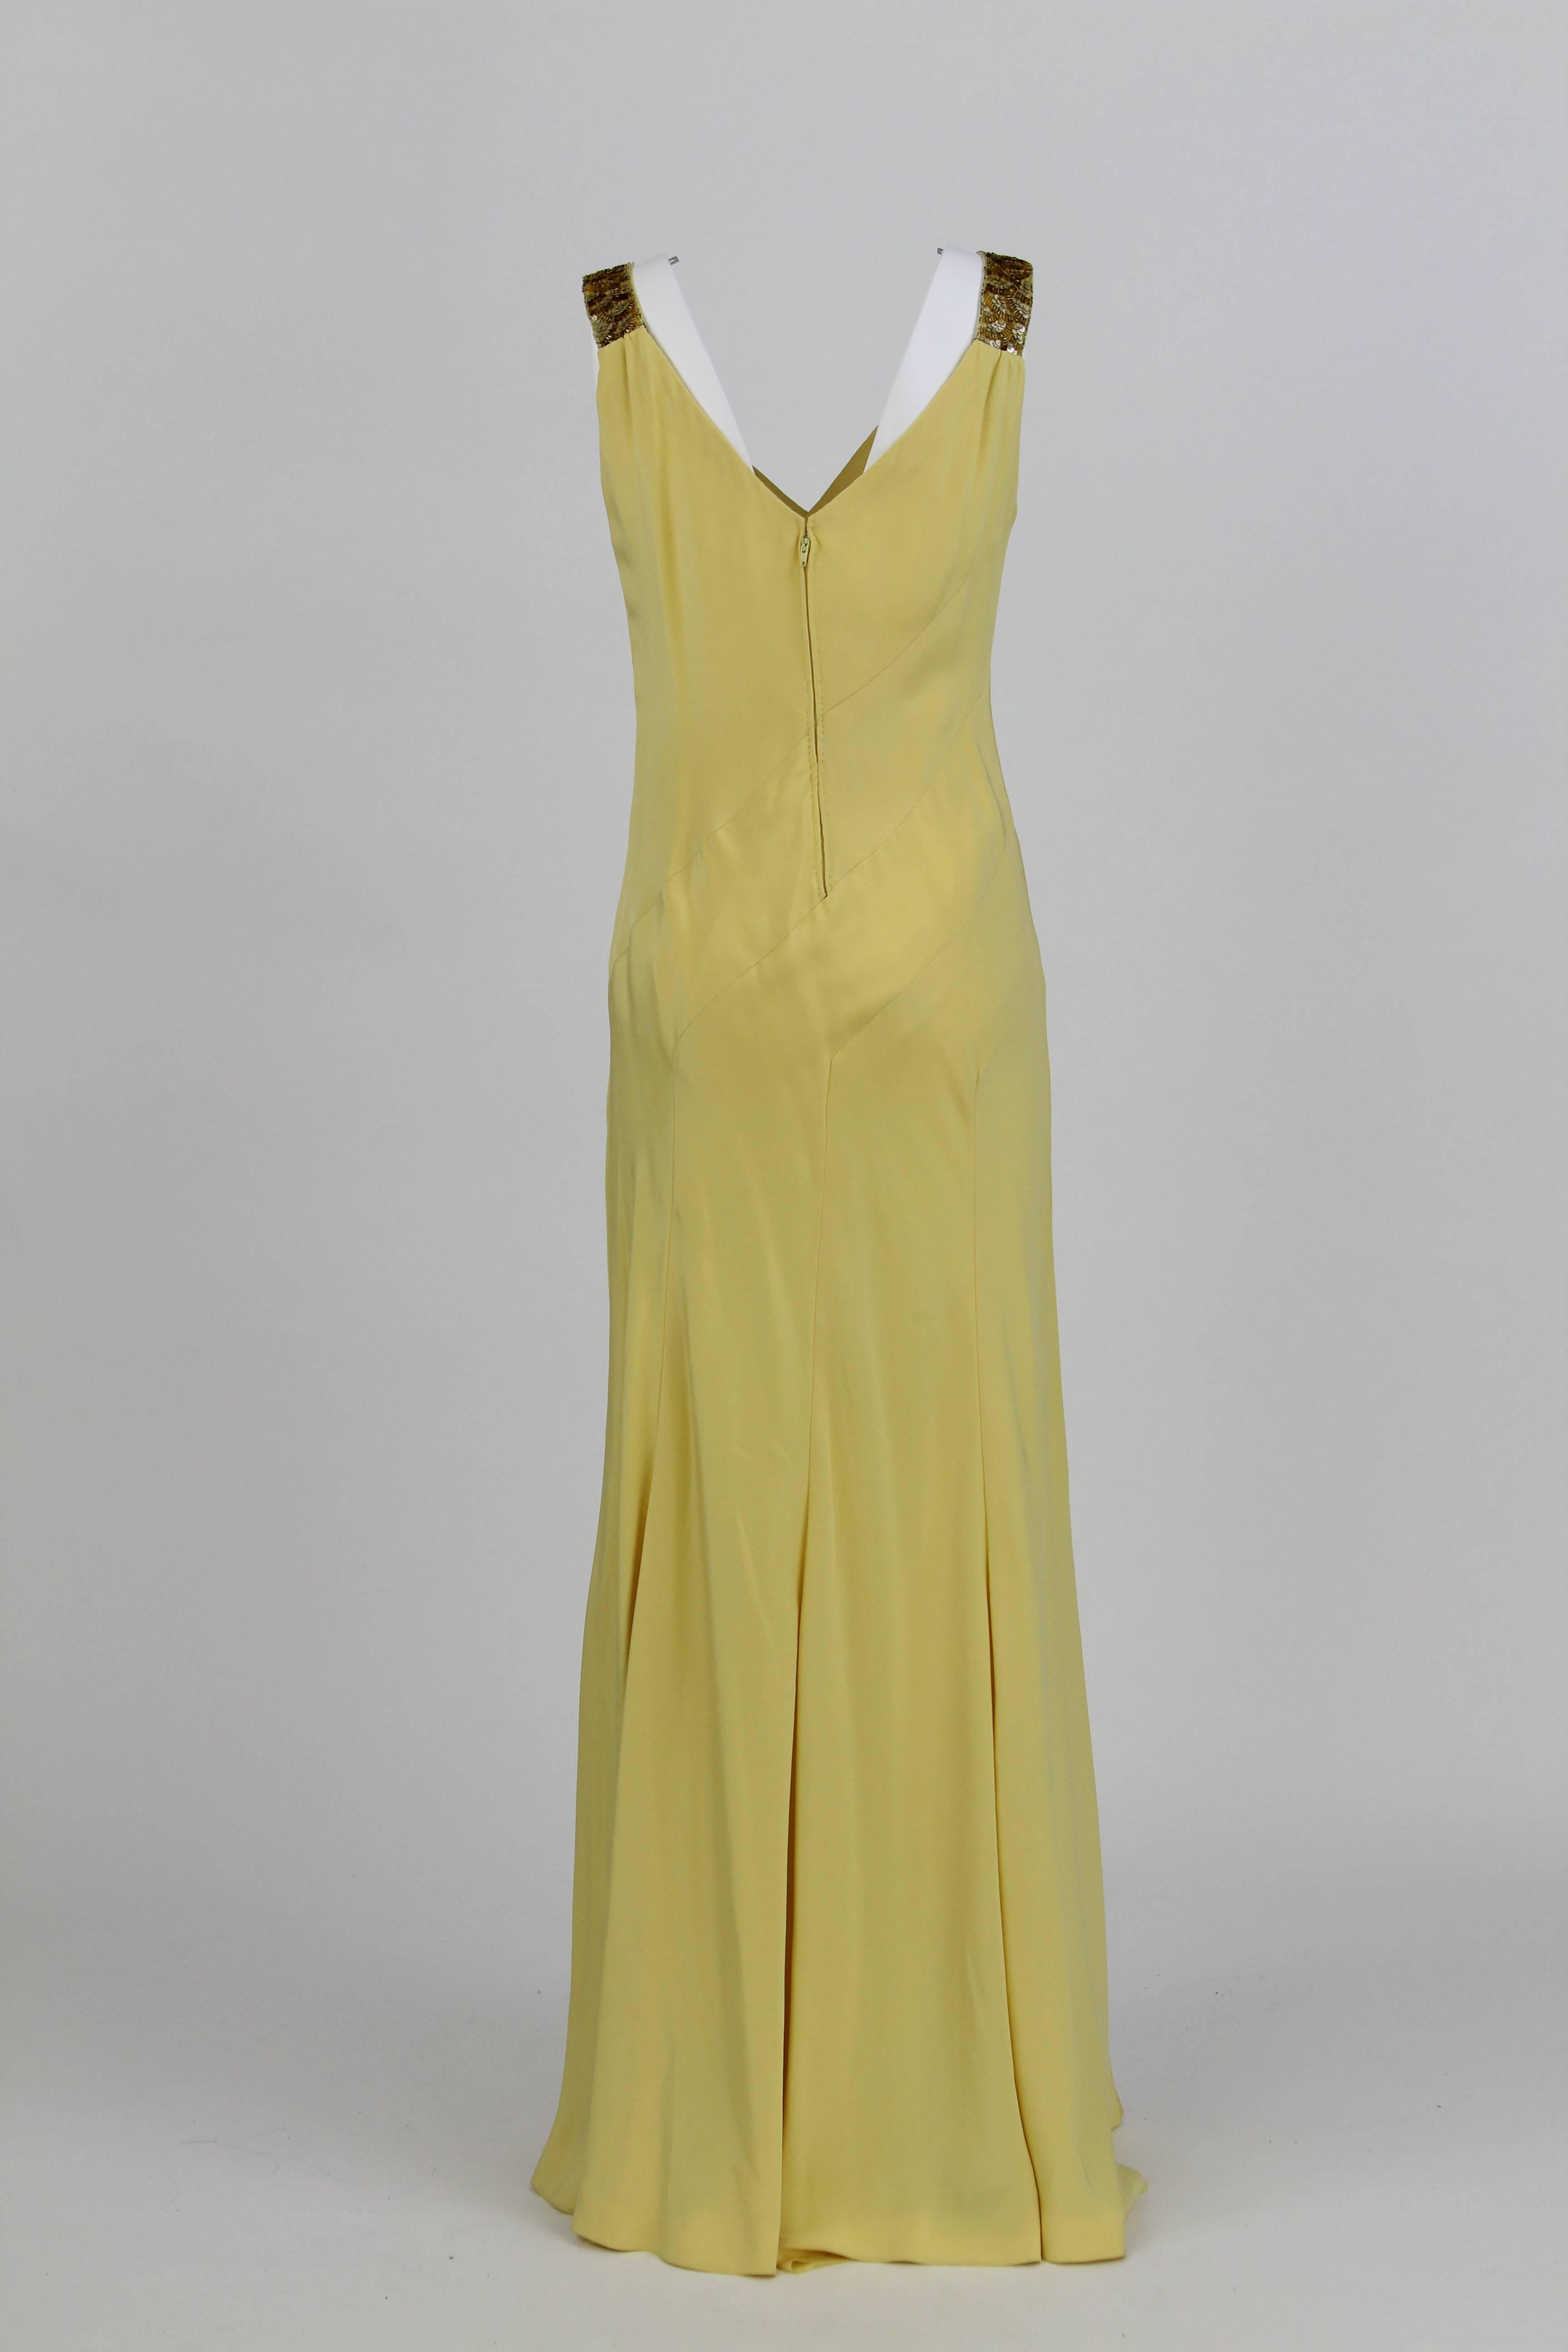 A.N.G.E.L.O. Vintage - Italy

Flattering yellow dress handmade in Italy by the tailoring house Stop Sénès, featuring a V-neck, sequin embellished straps and a back zipper. 

In good conditions.

The dress is size 42. 

Considering the straps, the